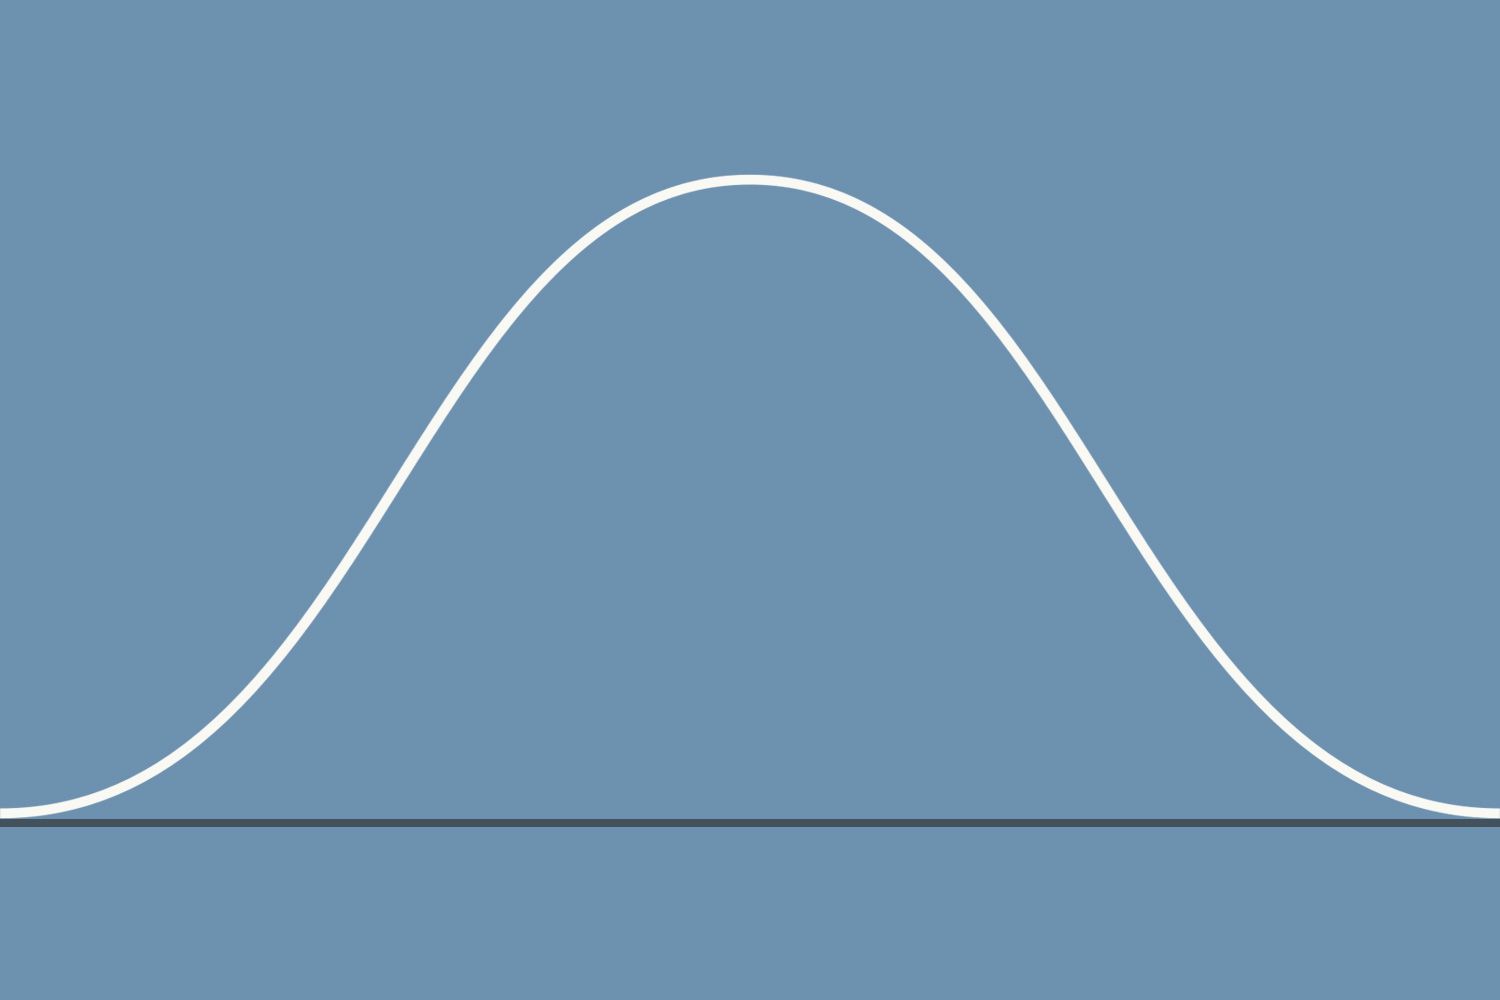 Types Of Curved Graphs